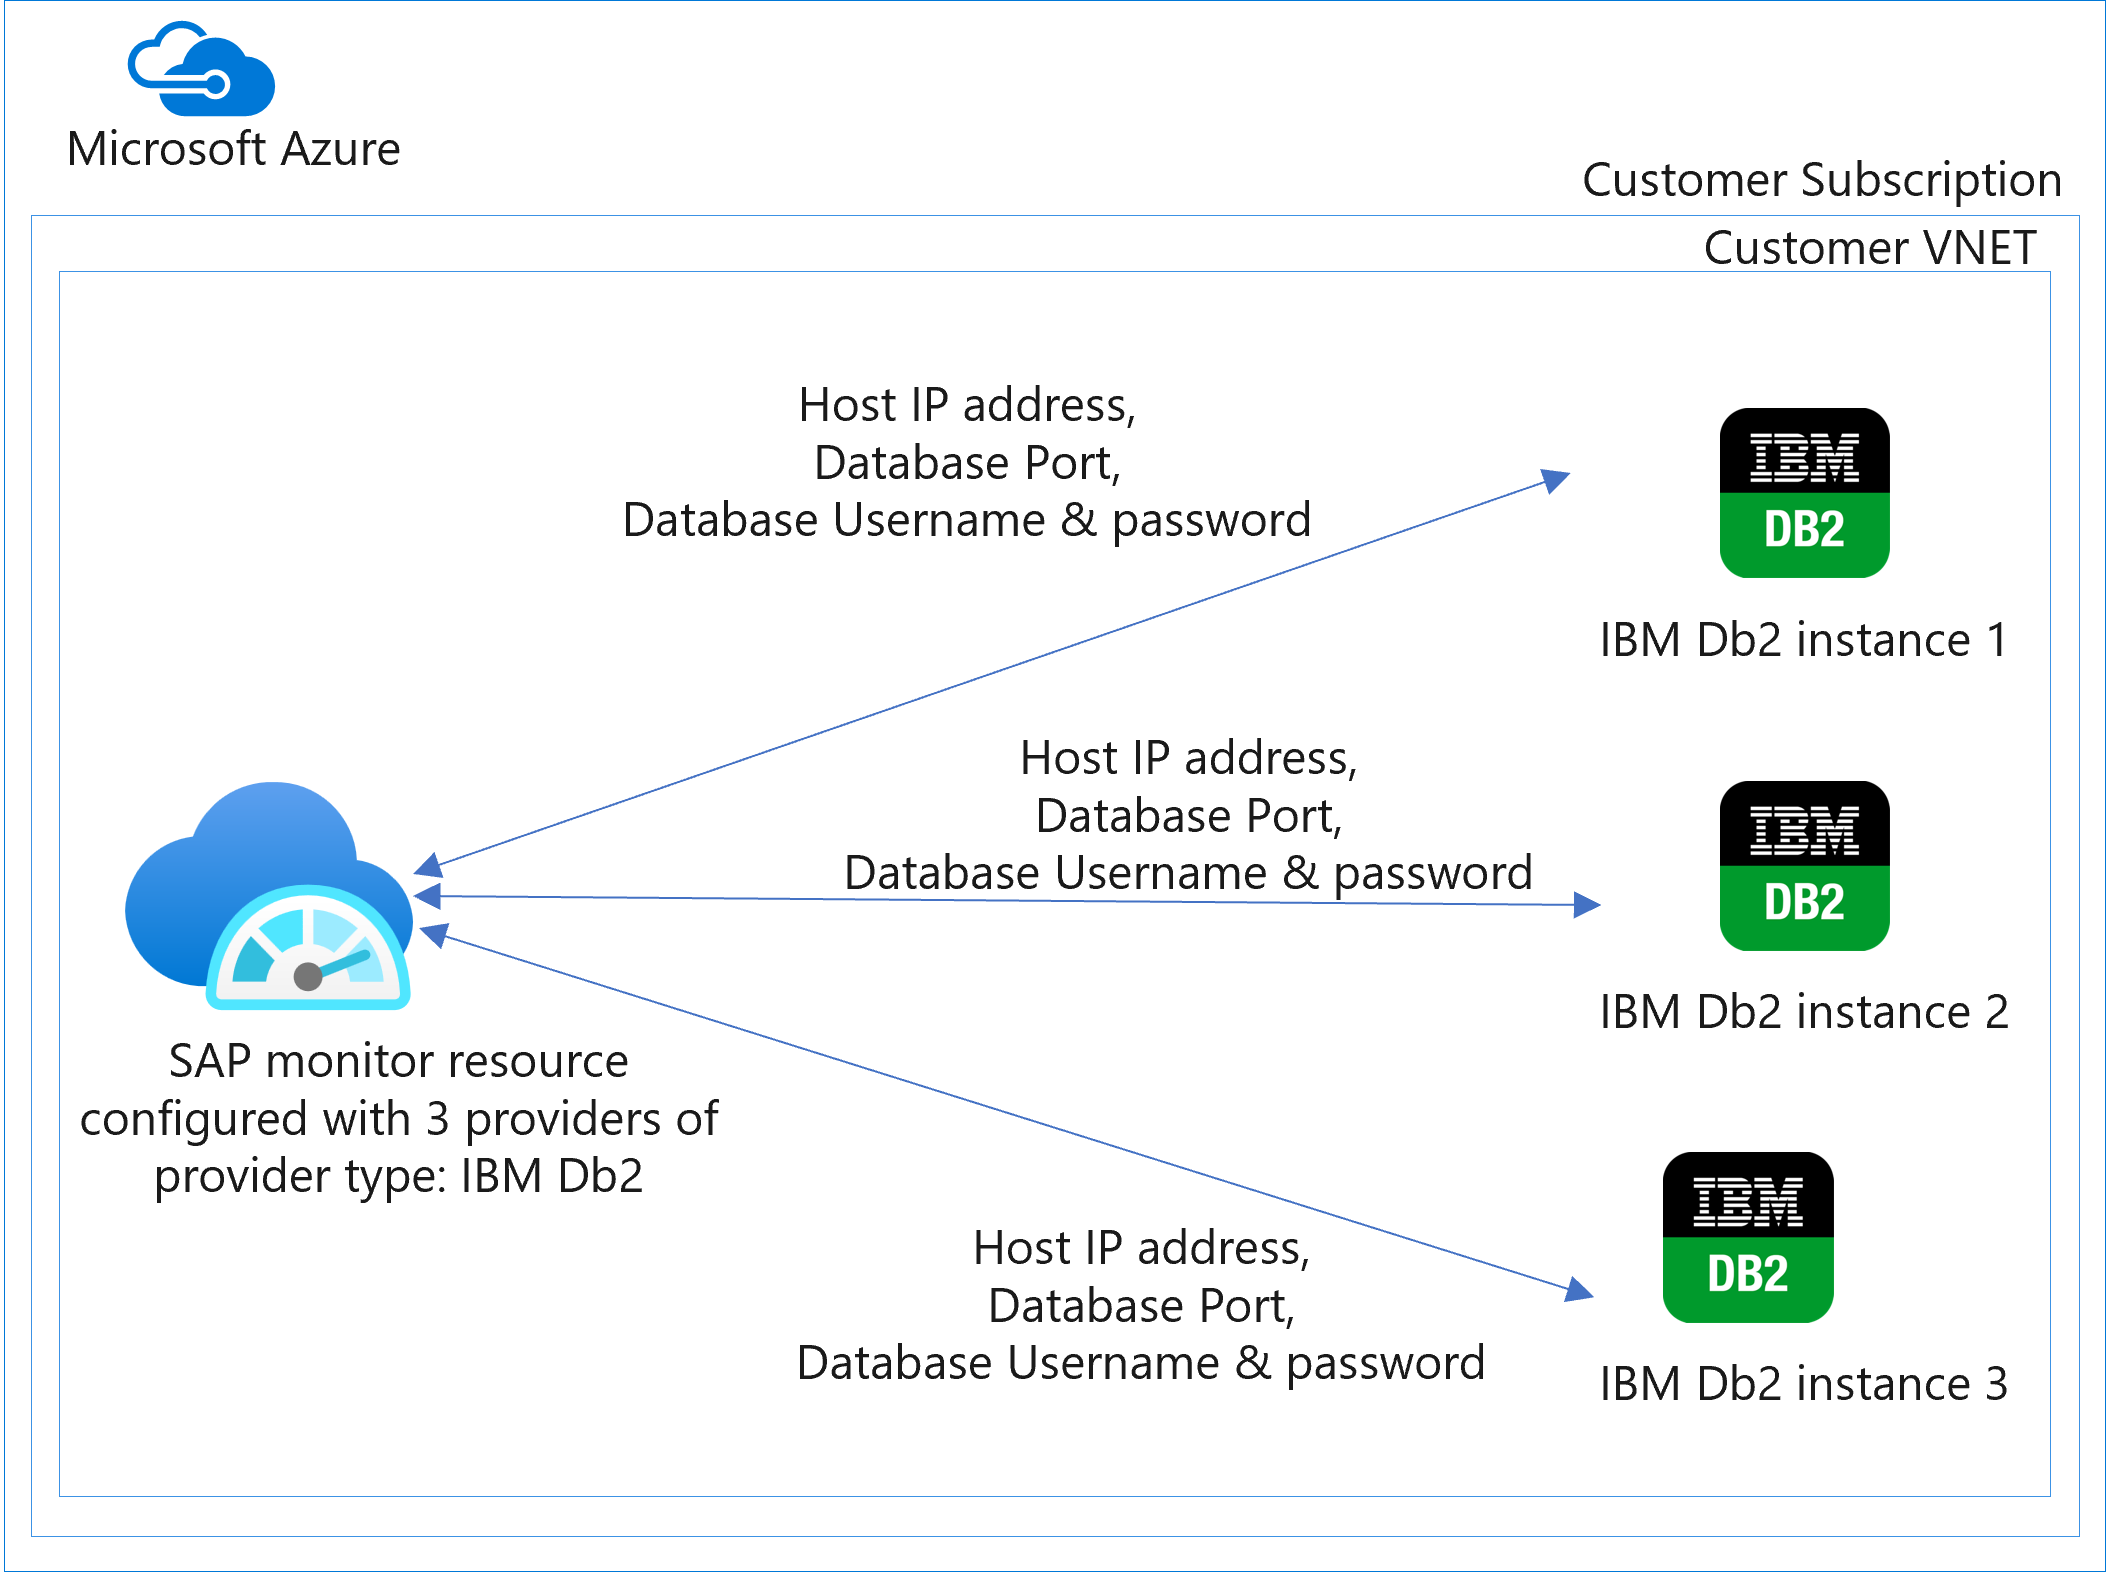 Diagram shows Azure Monitor for SAP solutions providers - IBM Db2 architecture.